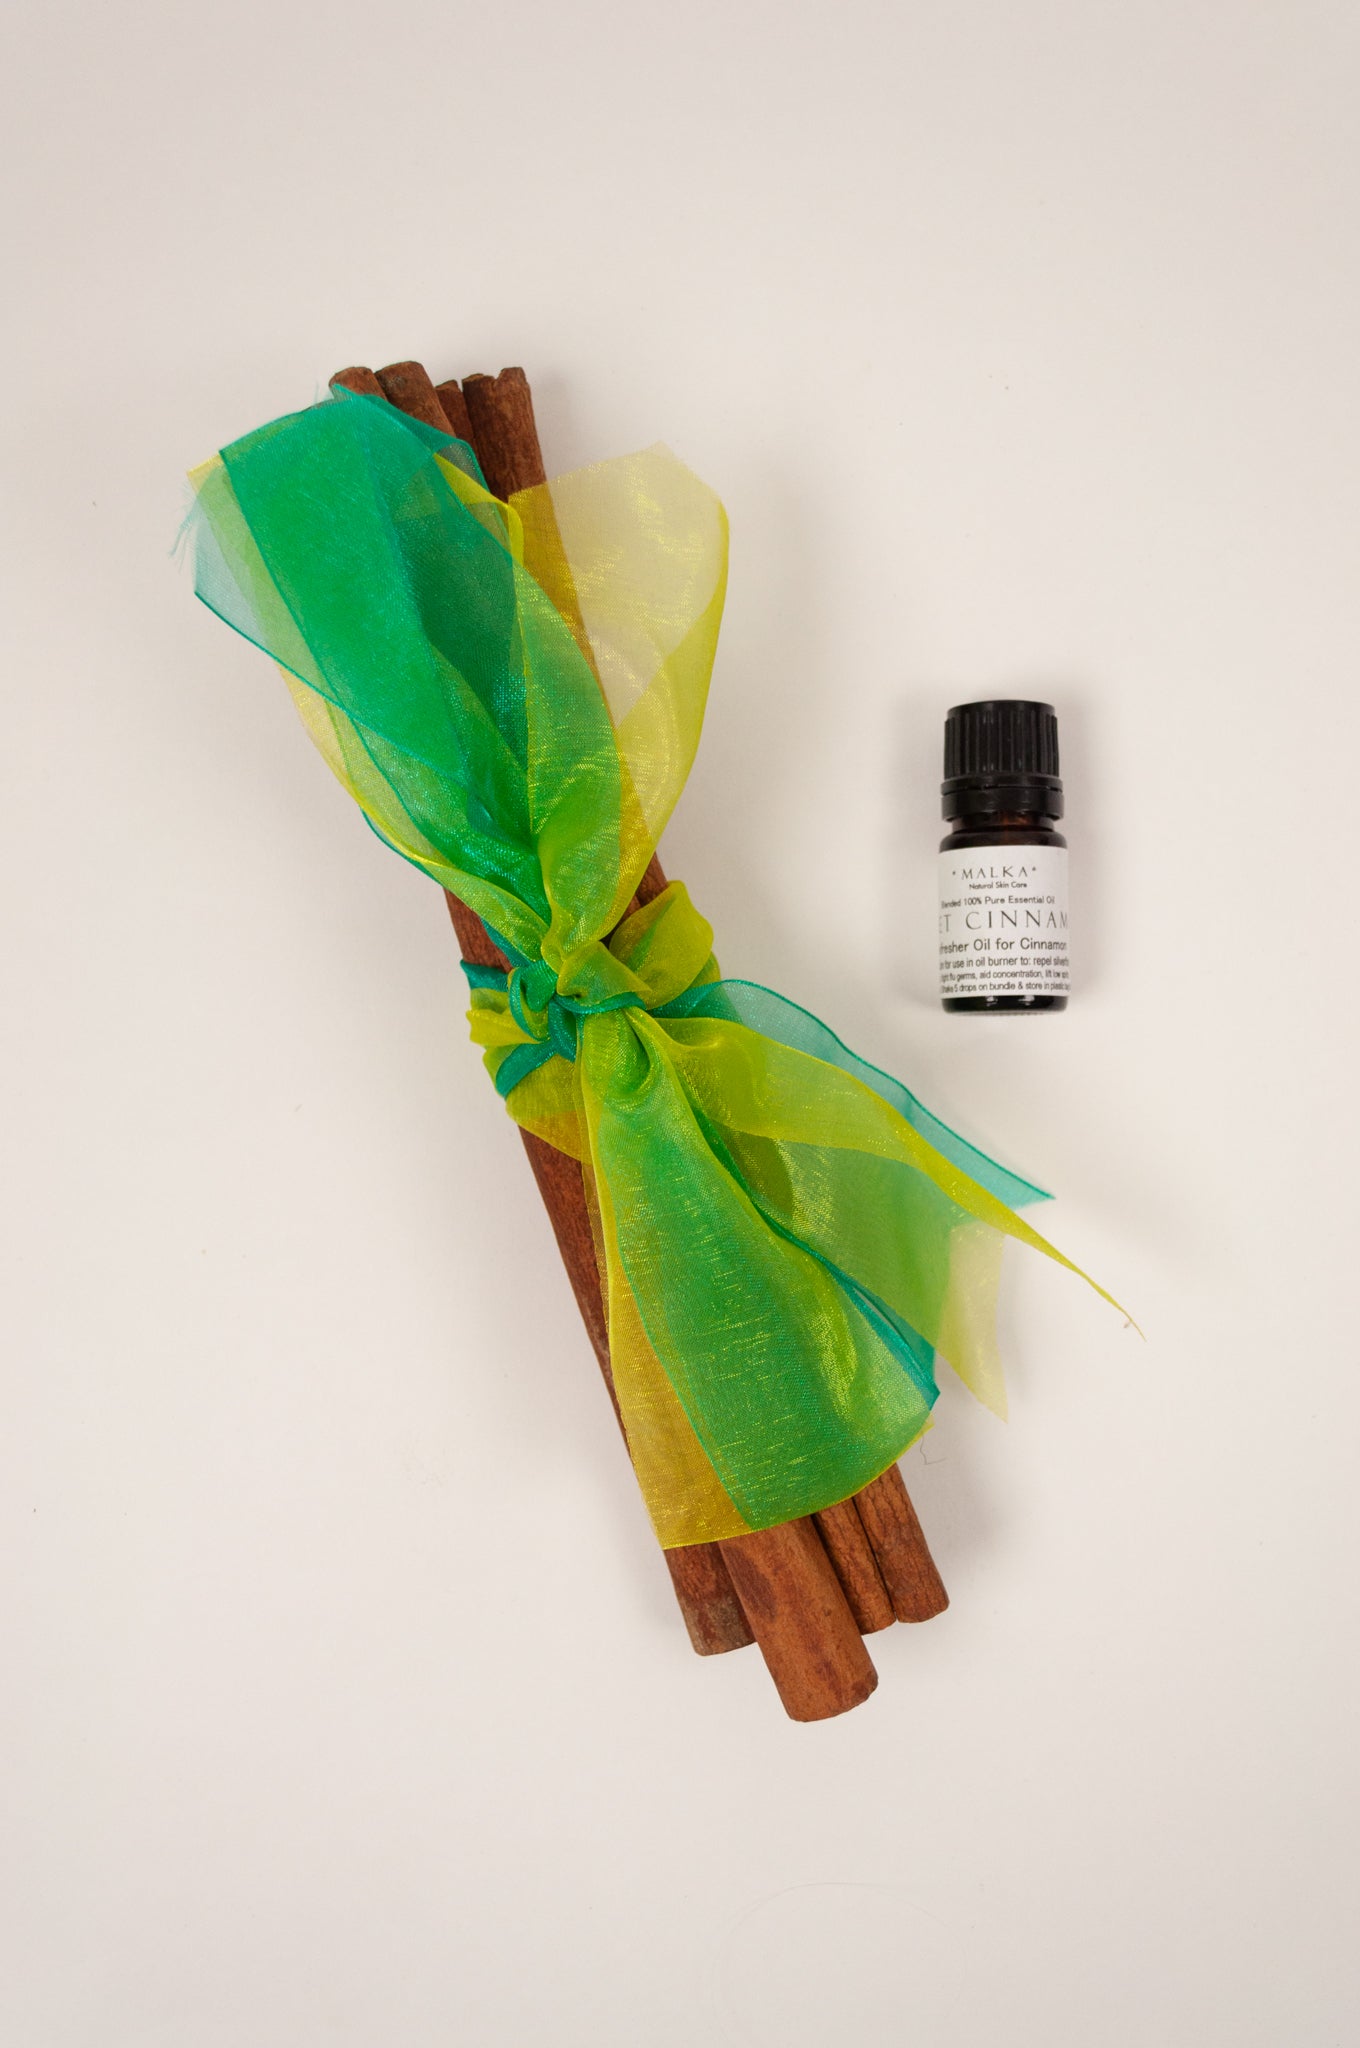 Juniper Hearth cinnamon stick bundles tied with brightly coloured organza ribbons. And sweet cinnamon oil.